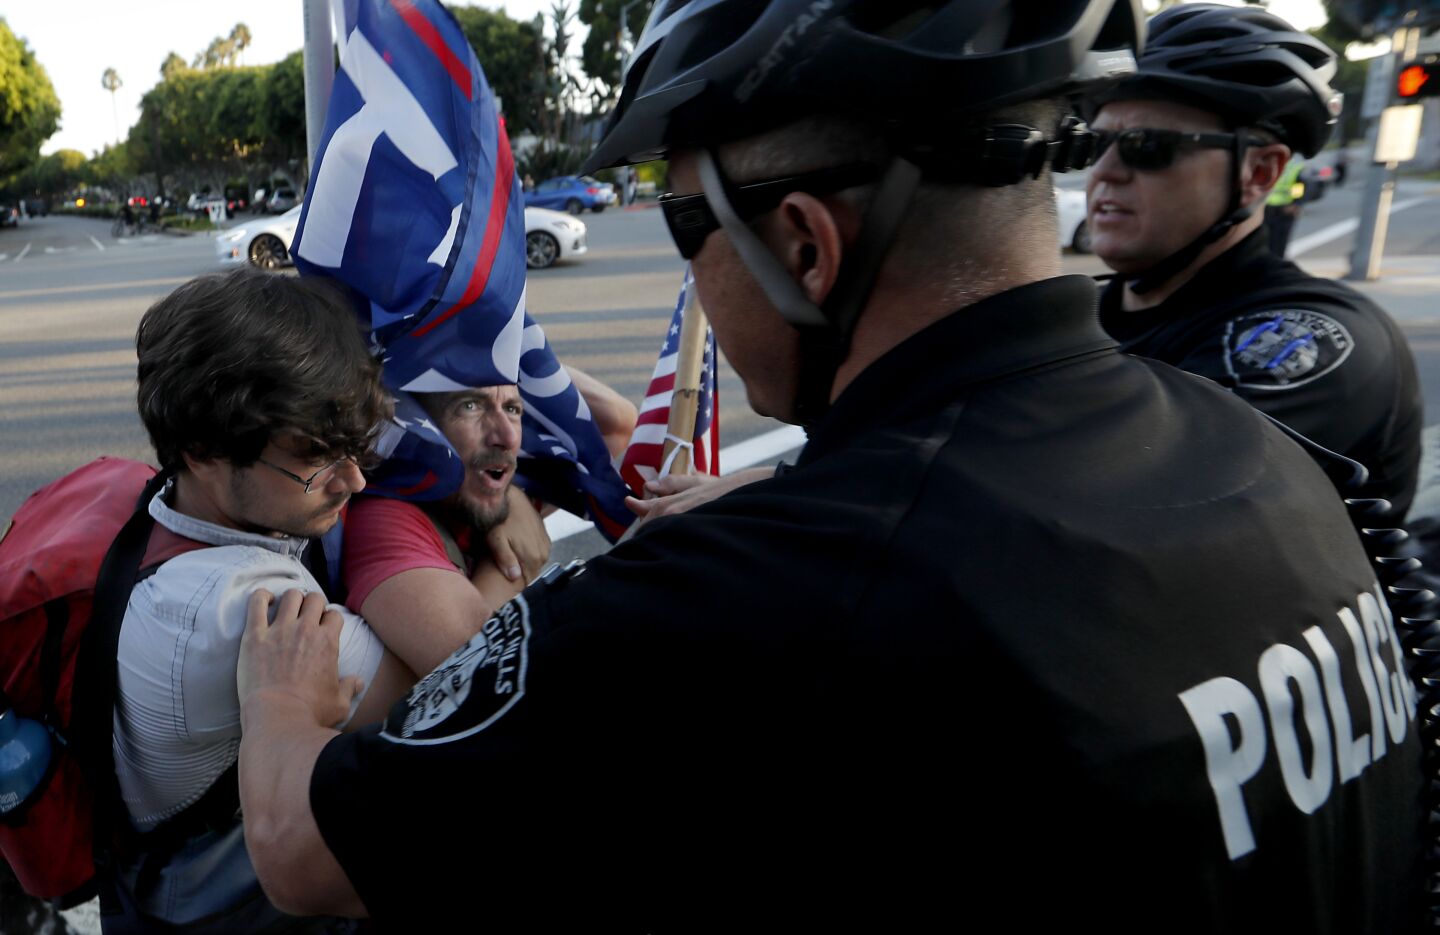 Beverly Hills police officers break up a scuffle between pro- and anti-Trump protesters gathered at the intersection of Sunset Boulevard and Benedict Canyon Road in Beverly Hills.